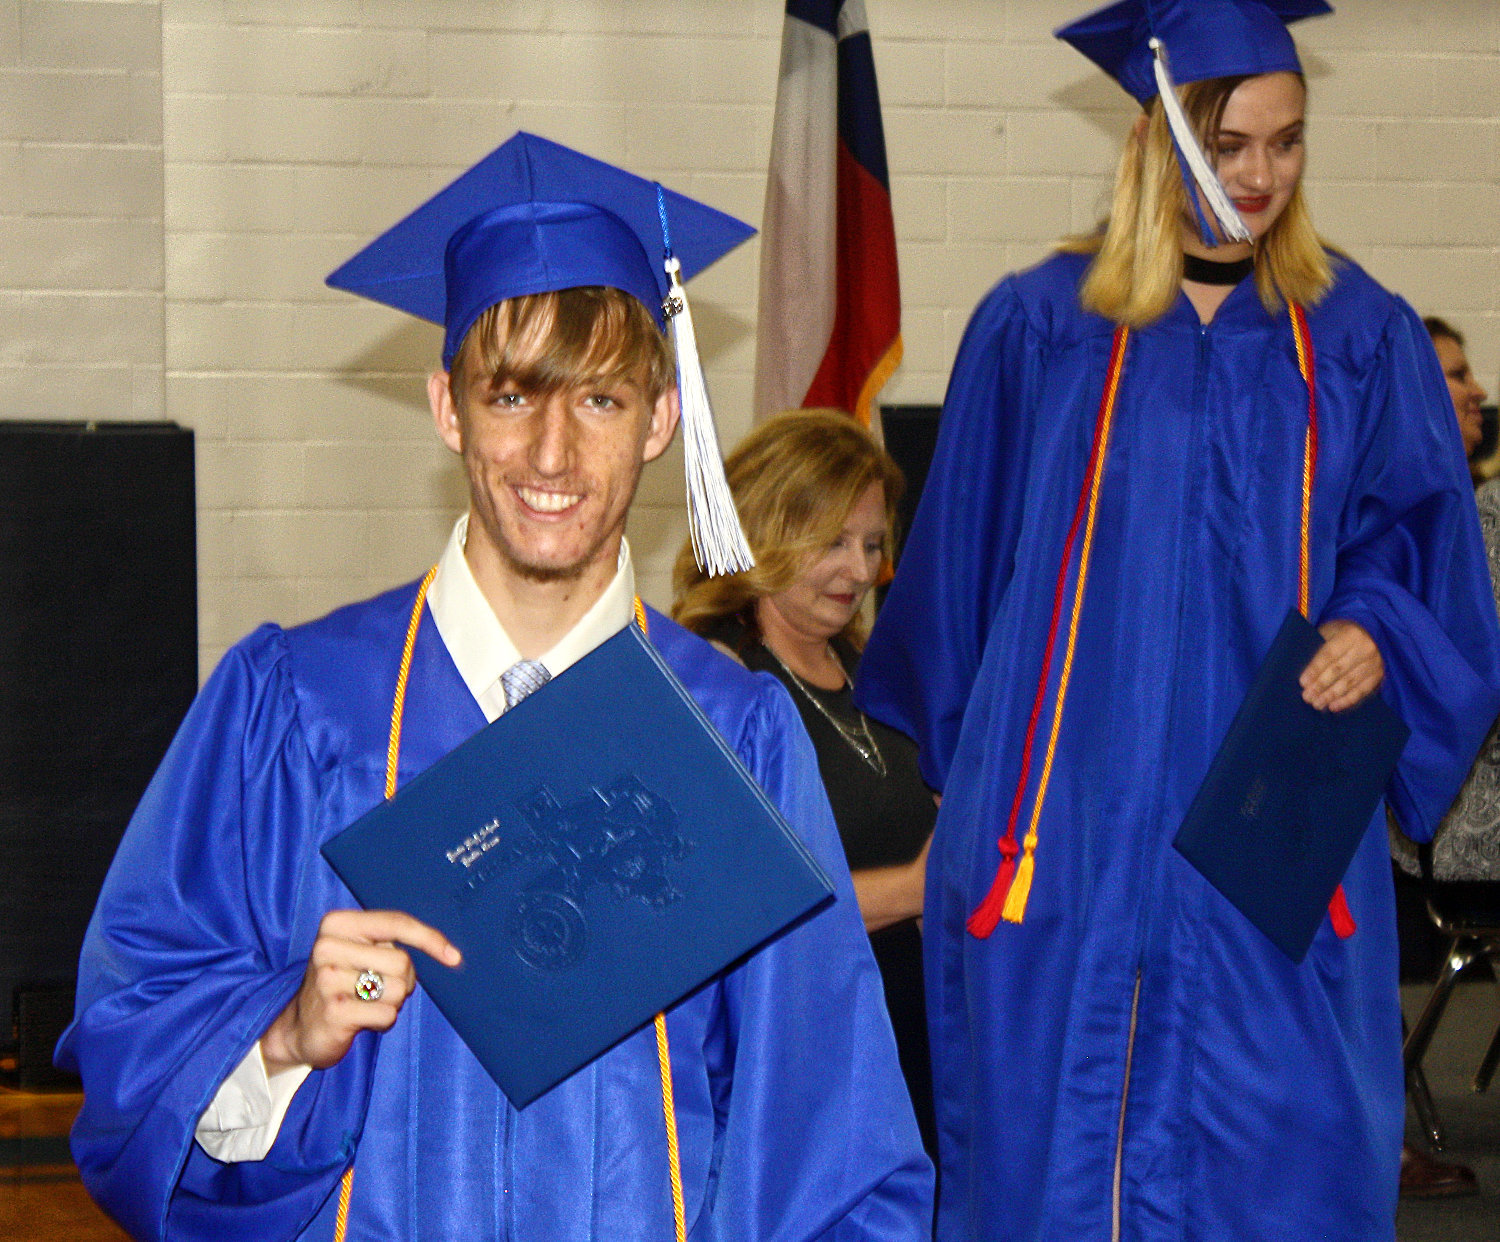 Yantis 2019 graduate Zachary Shearer smiles after walking off the stage with his diploma in hand.